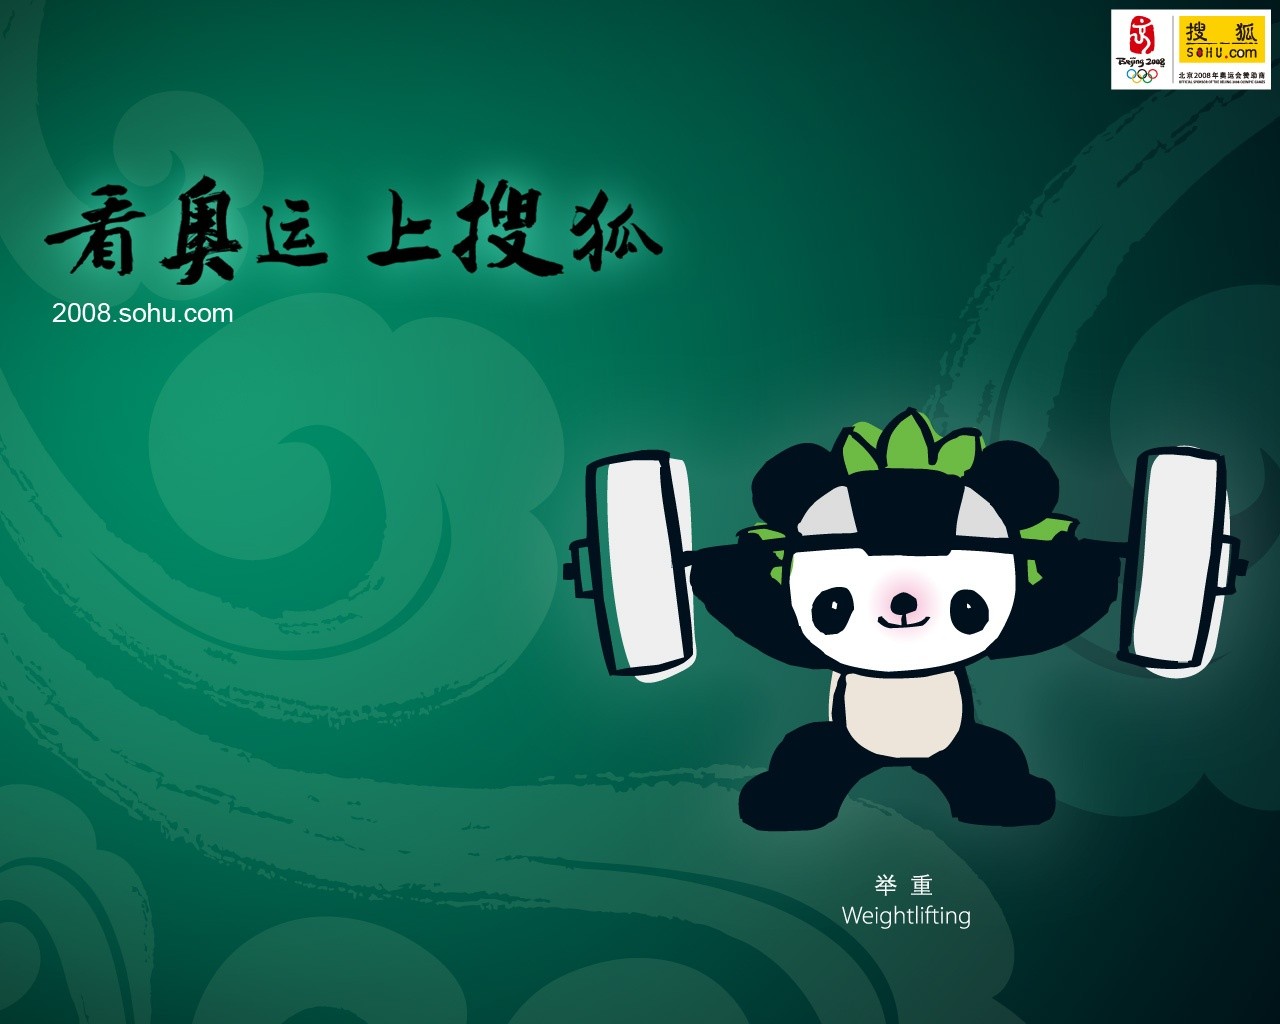 08 Olympic Games Fuwa Wallpapers #10 - 1280x1024